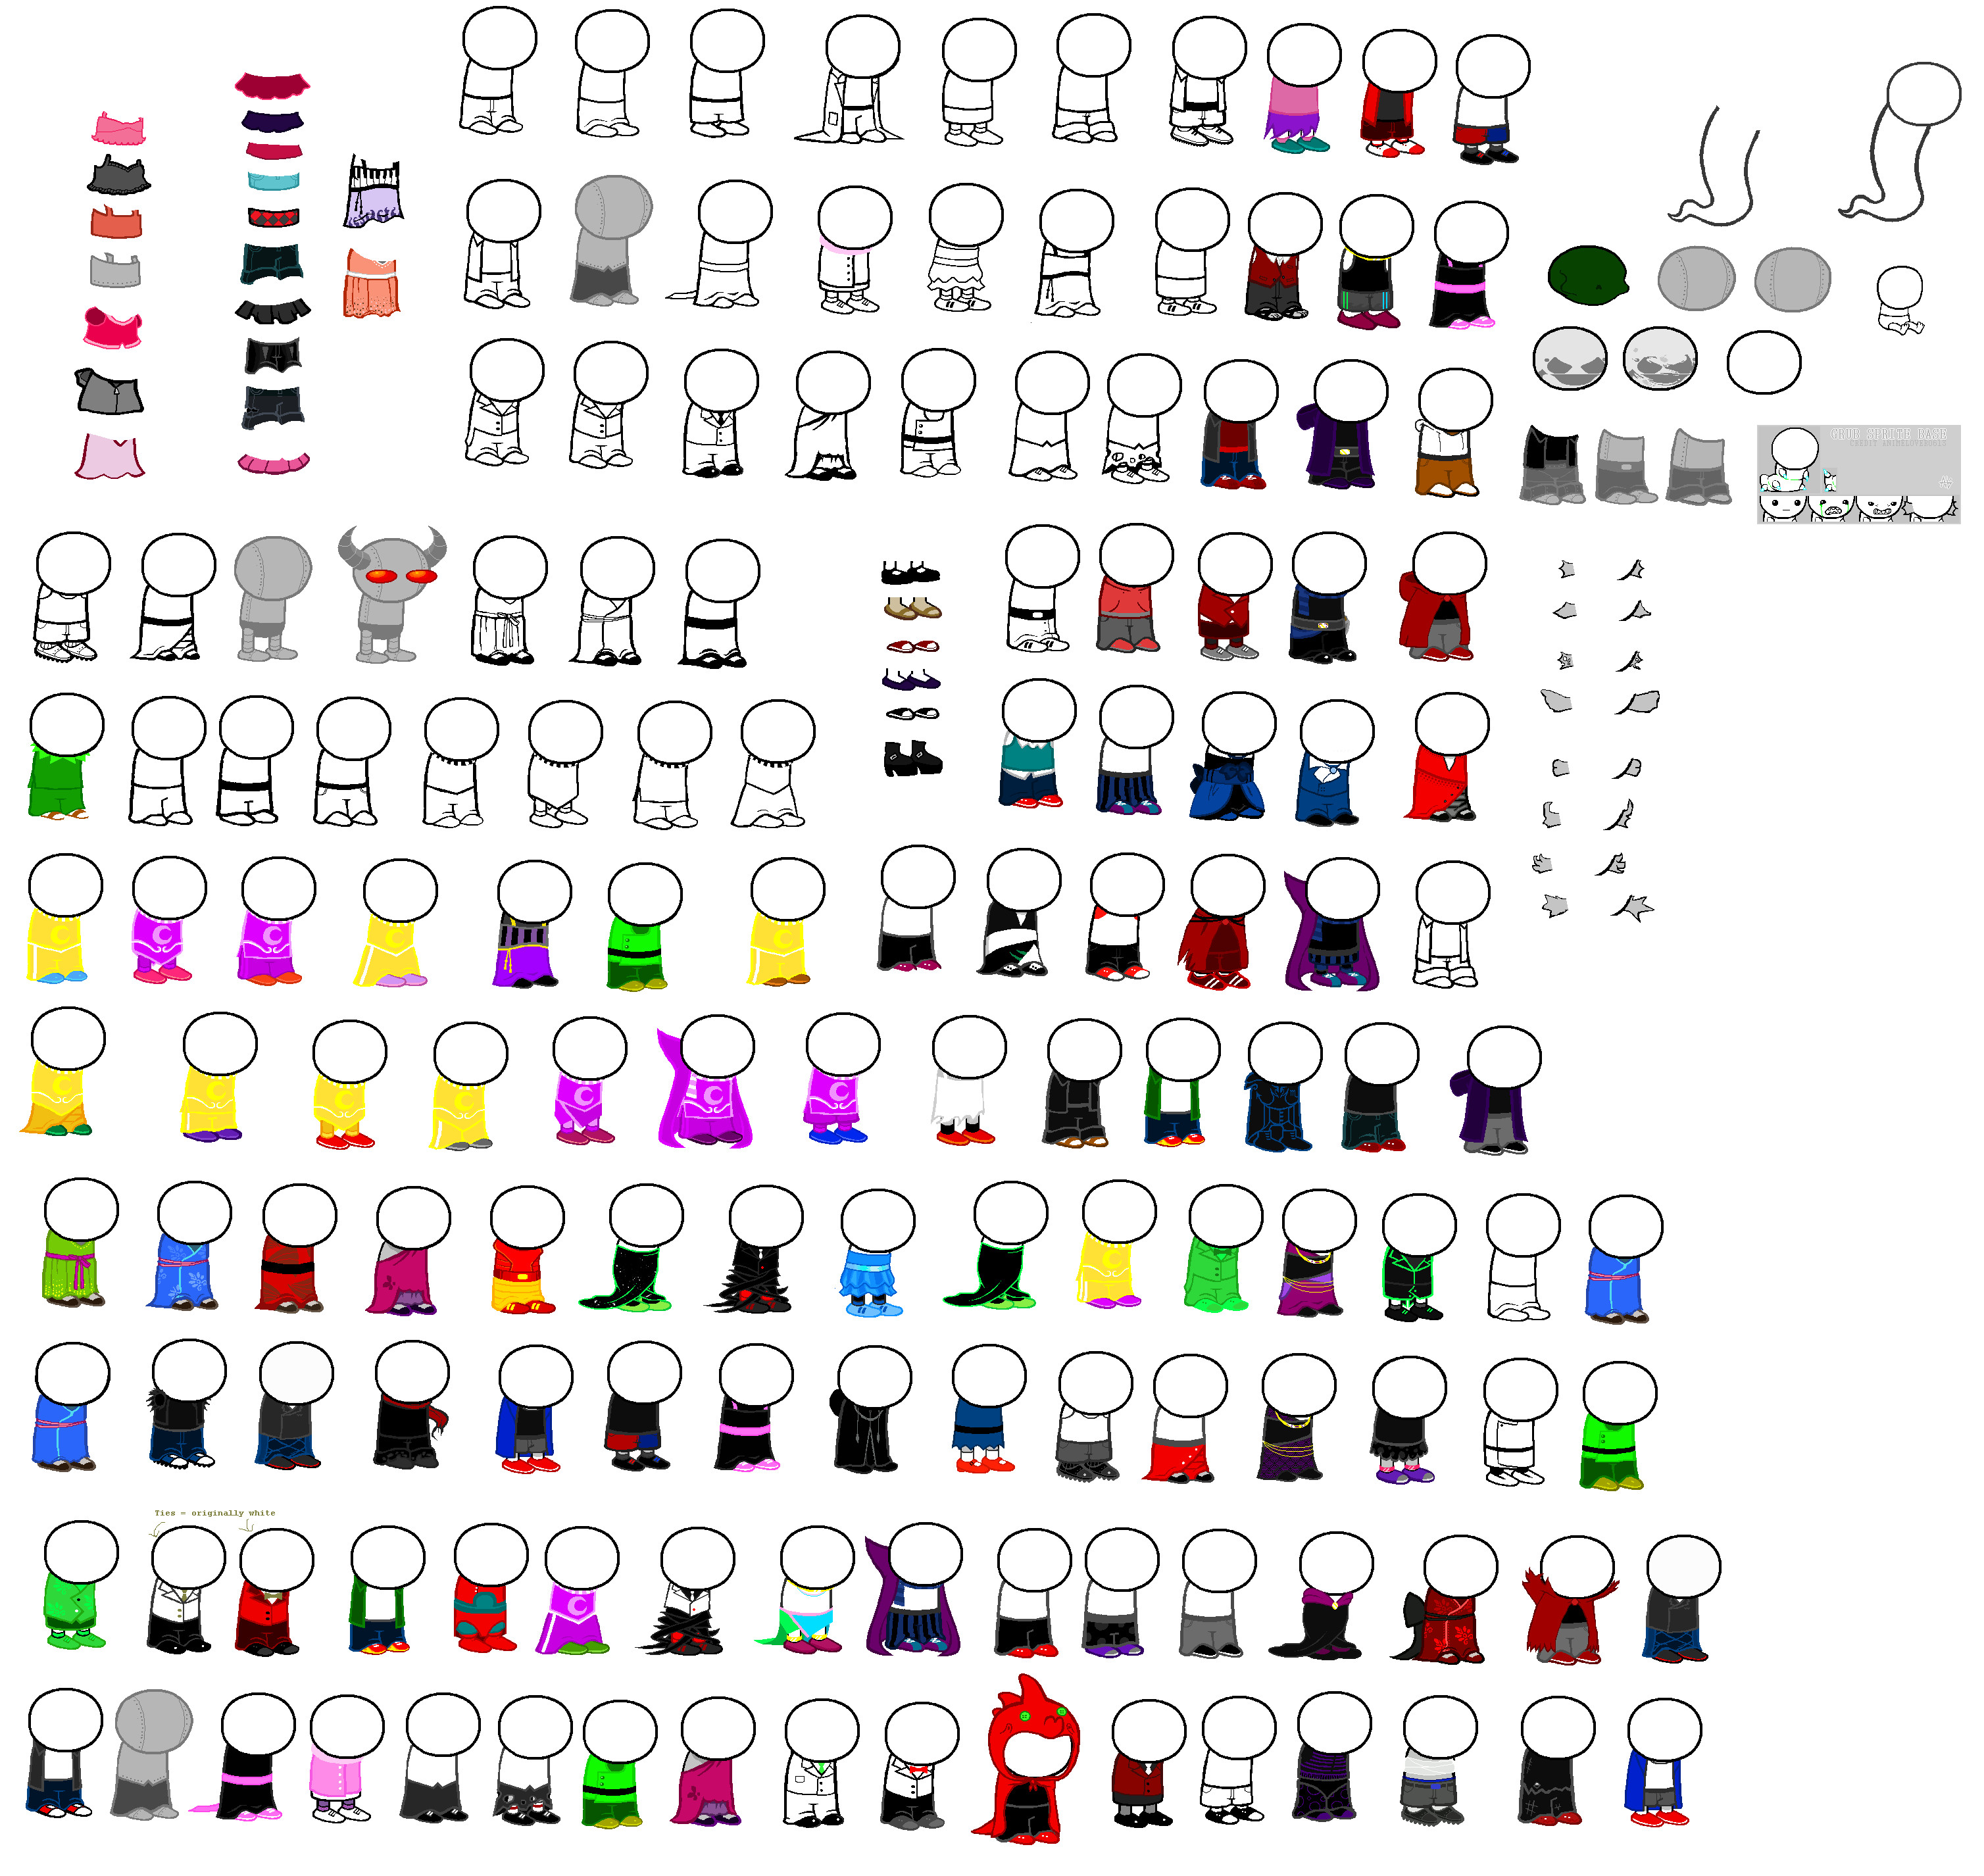 Homestuck Clothes plus Bases Sprite Sheet by blahjerry on